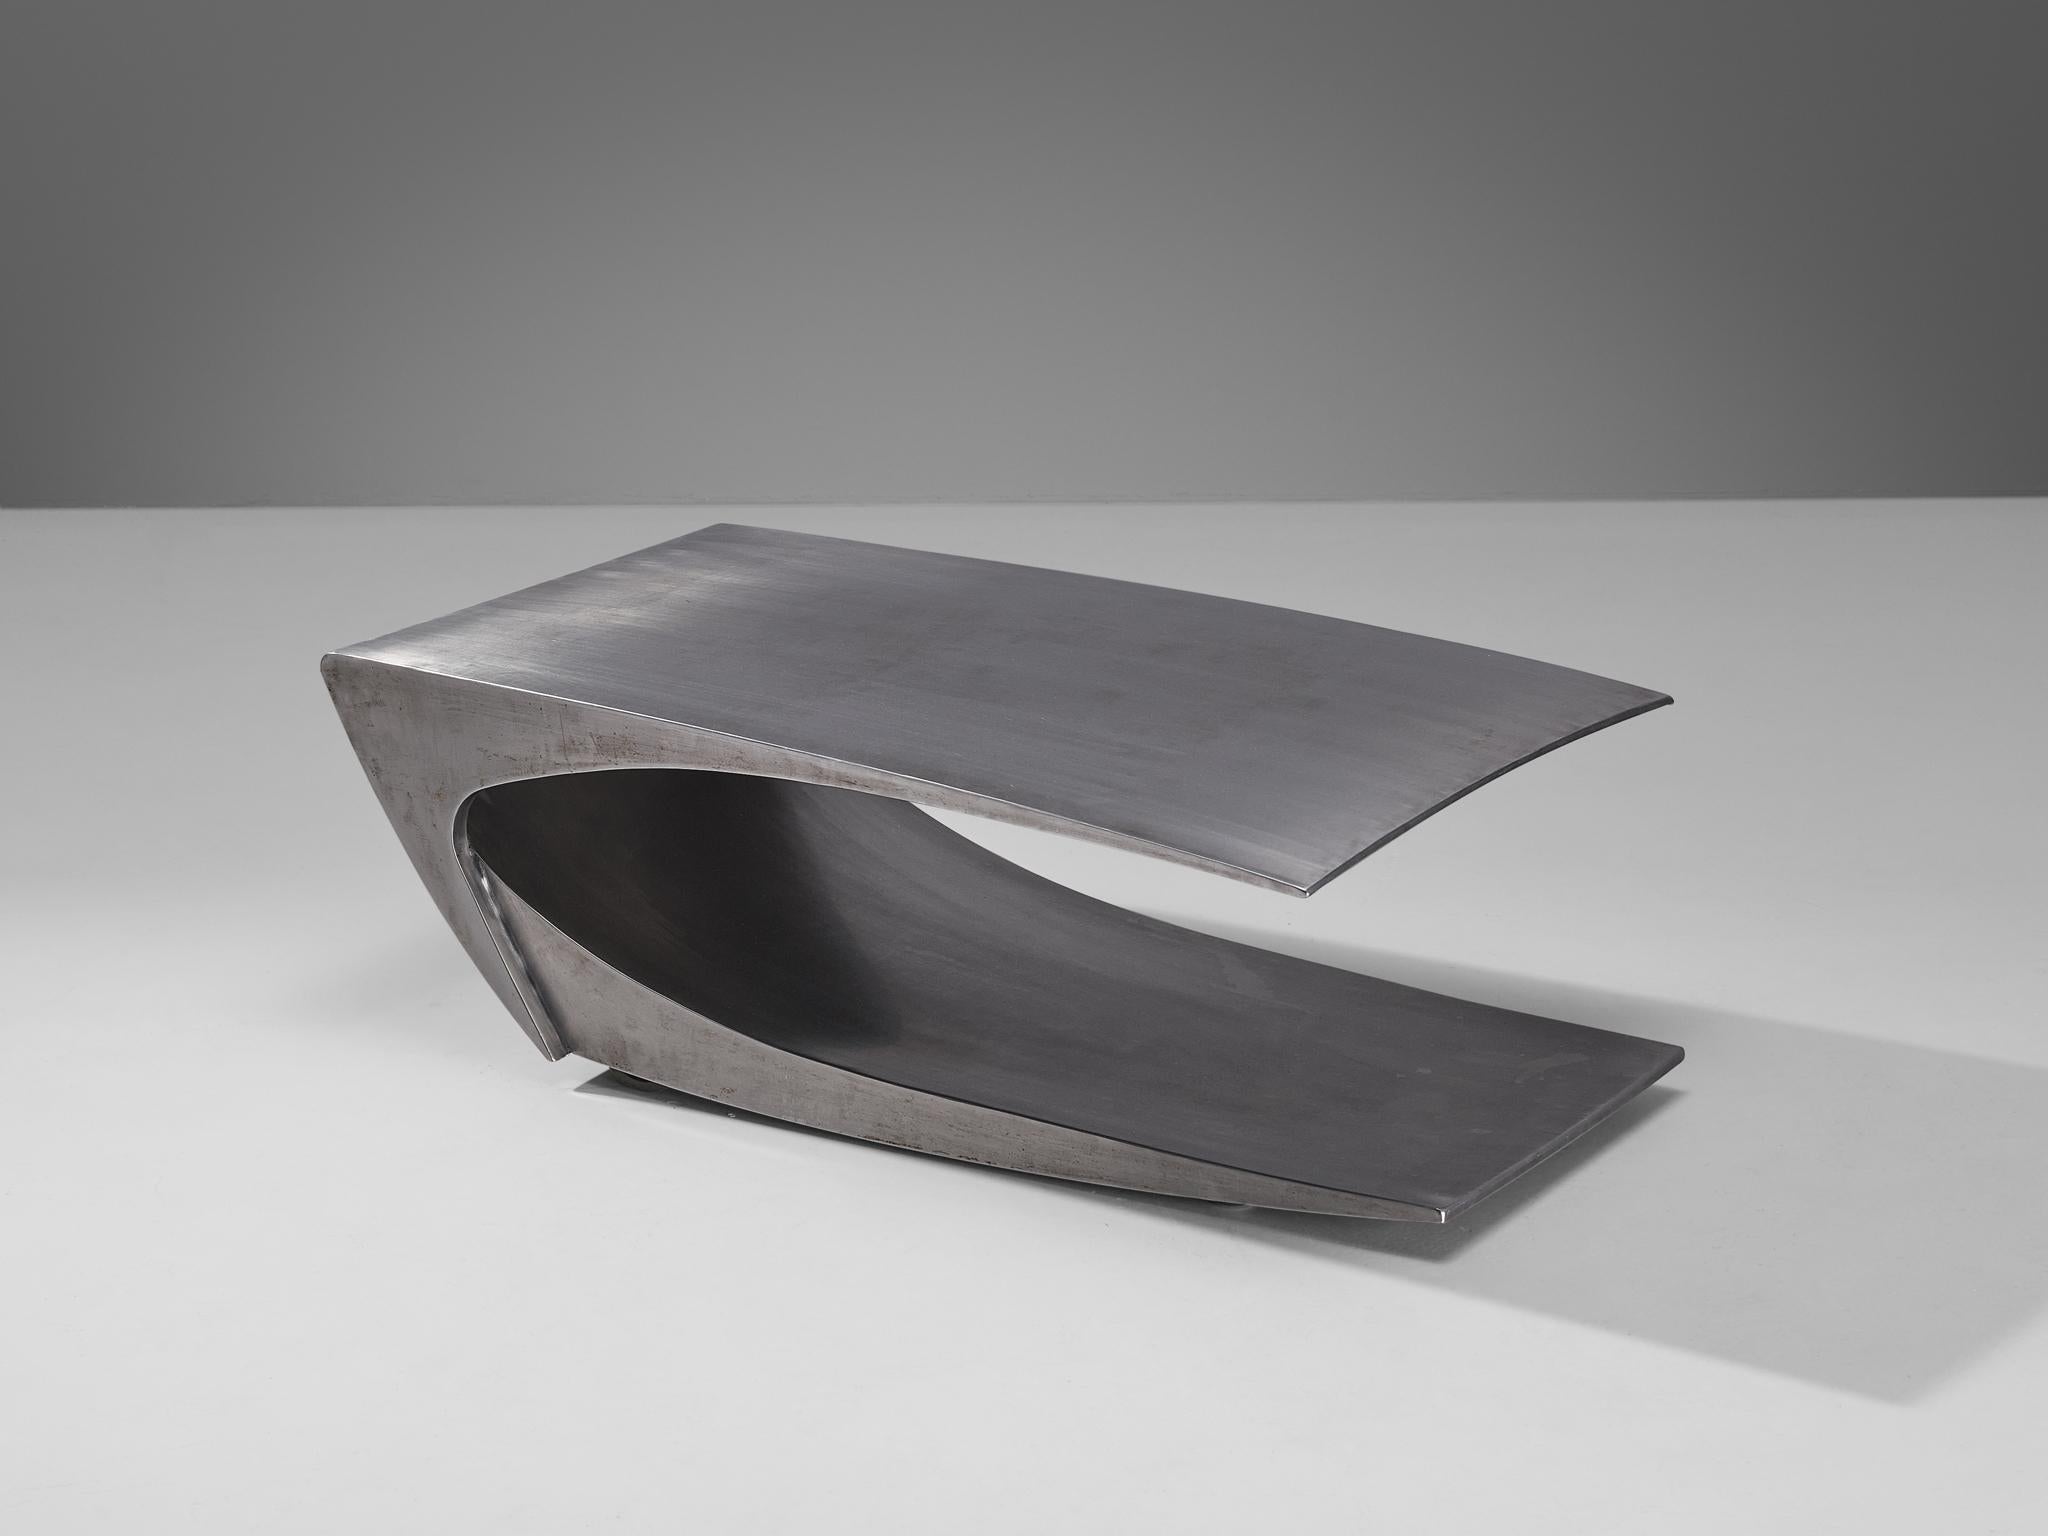 Coffee table, stainless steel, France, 1970s.

A sleek coffee table with a distinctive look, inspired by the 70s French stainless steel furniture style. Noted designers such as Michel Boyer, François Monnet, Roger Tallon, Maria Pergay, and Maison et